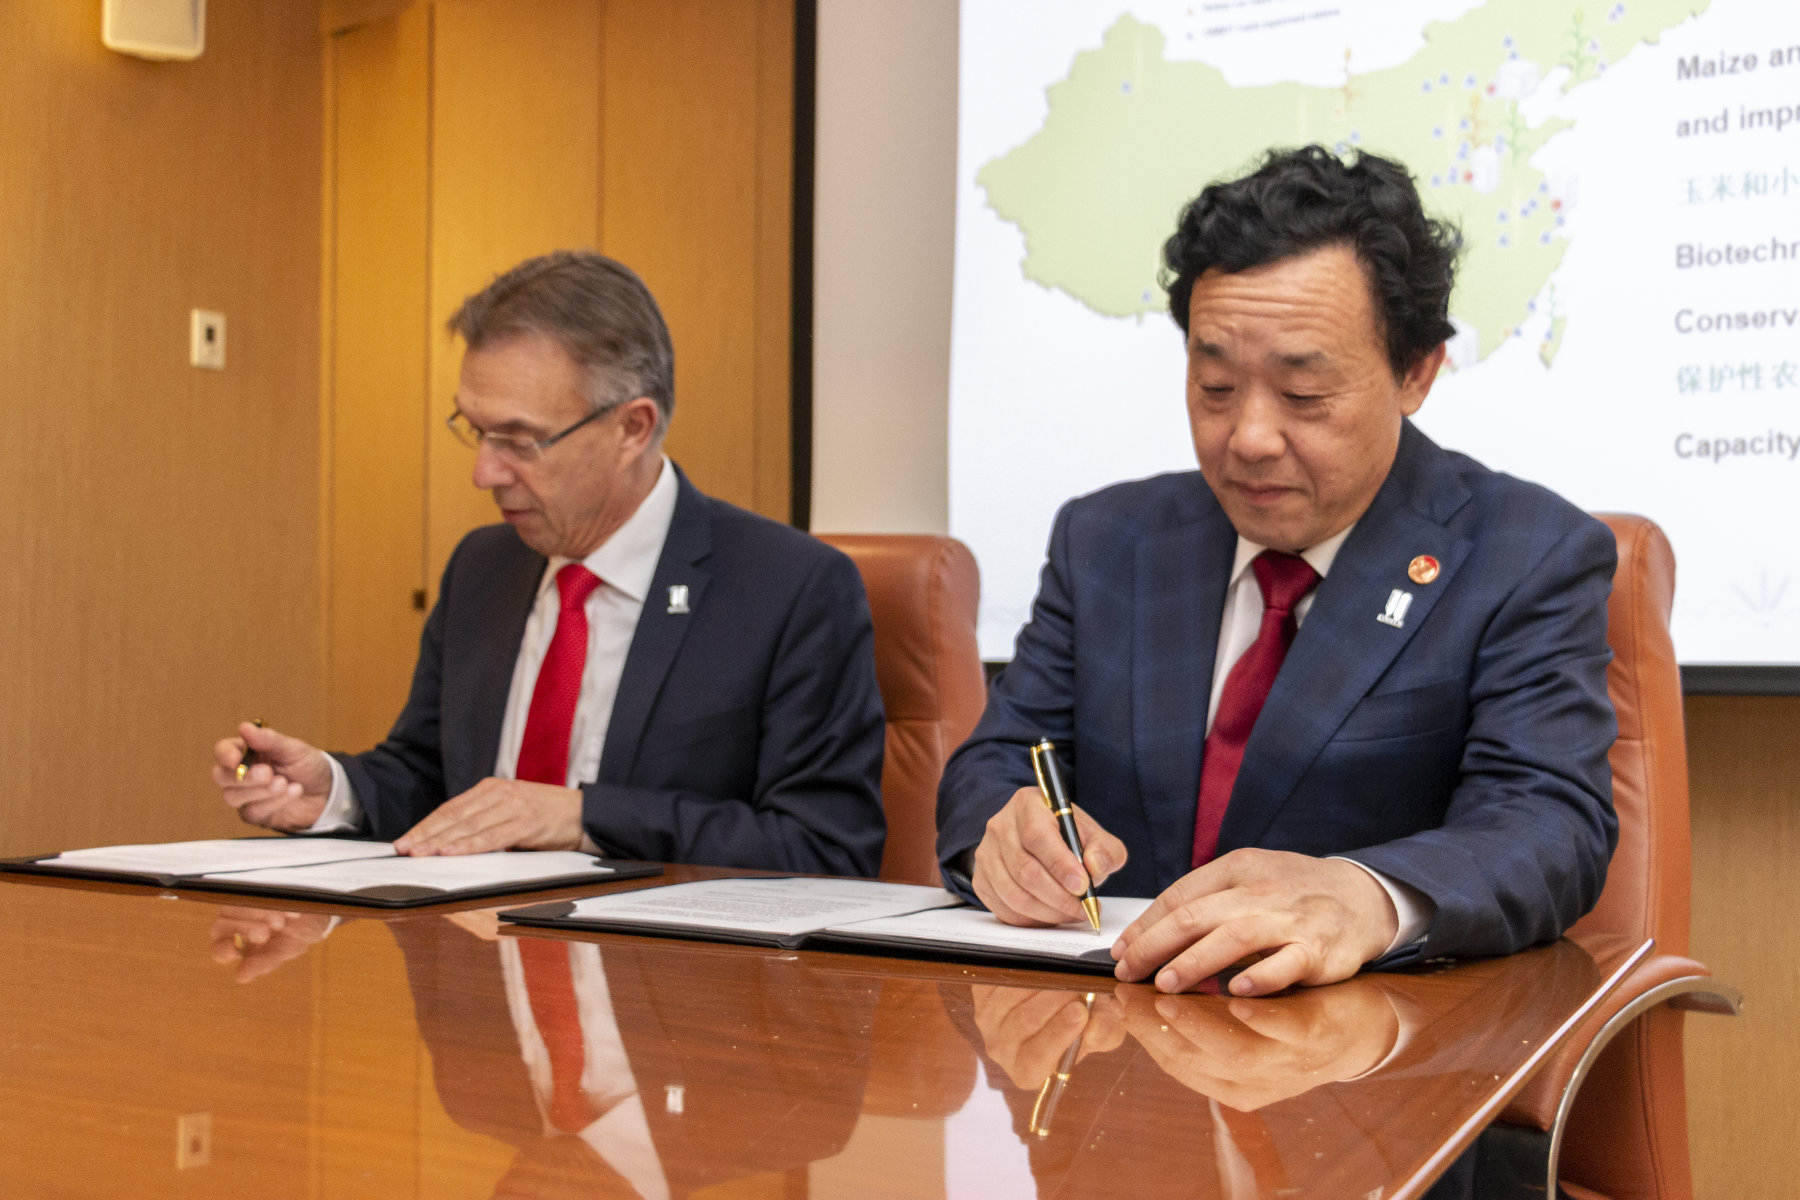 CIMMYT's director general Martin Kropff (left) and vice minister Qu Dongyu sign a memorandum of understanding for the establishment of a joint laboratory for maize and wheat improvement. (Photo: Gerardo Mejía/CIMMYT)